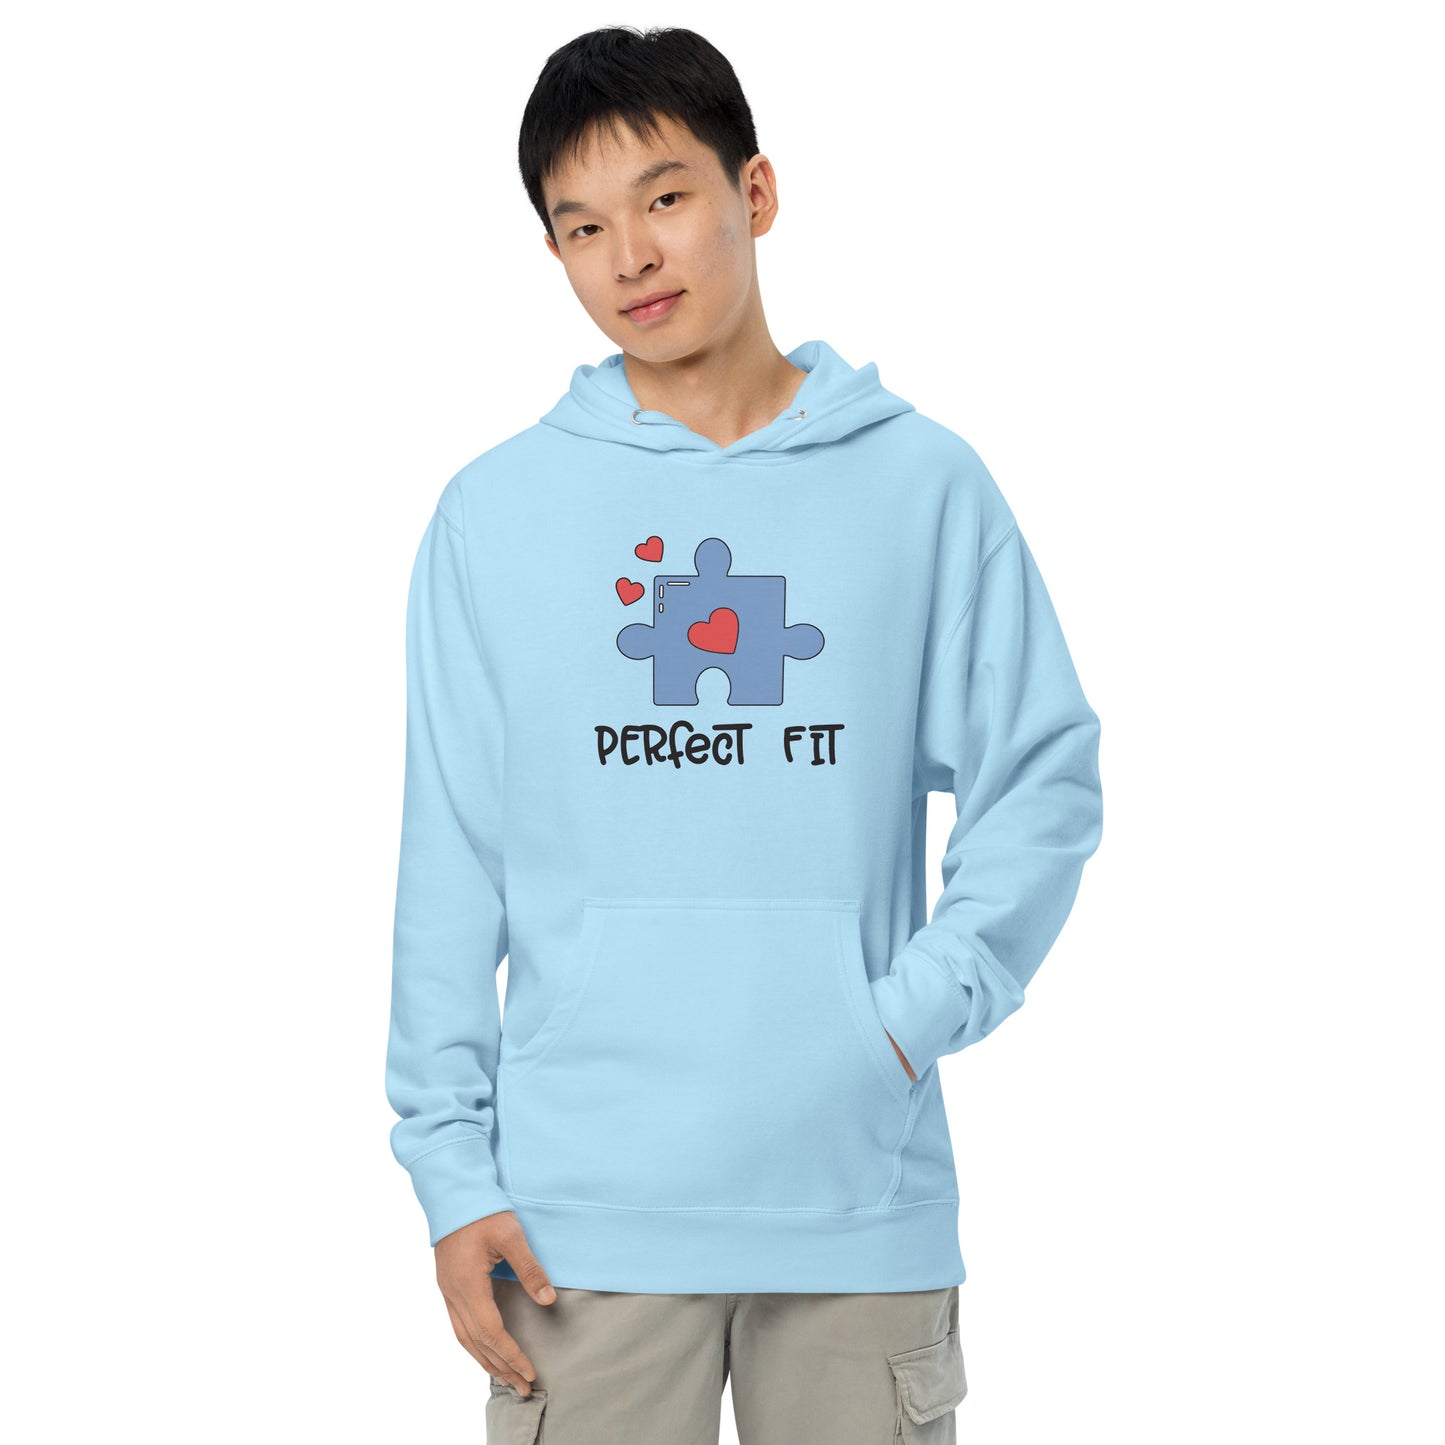 Adult 'Perfect Fit Blue Piece' Midweight Hoodie